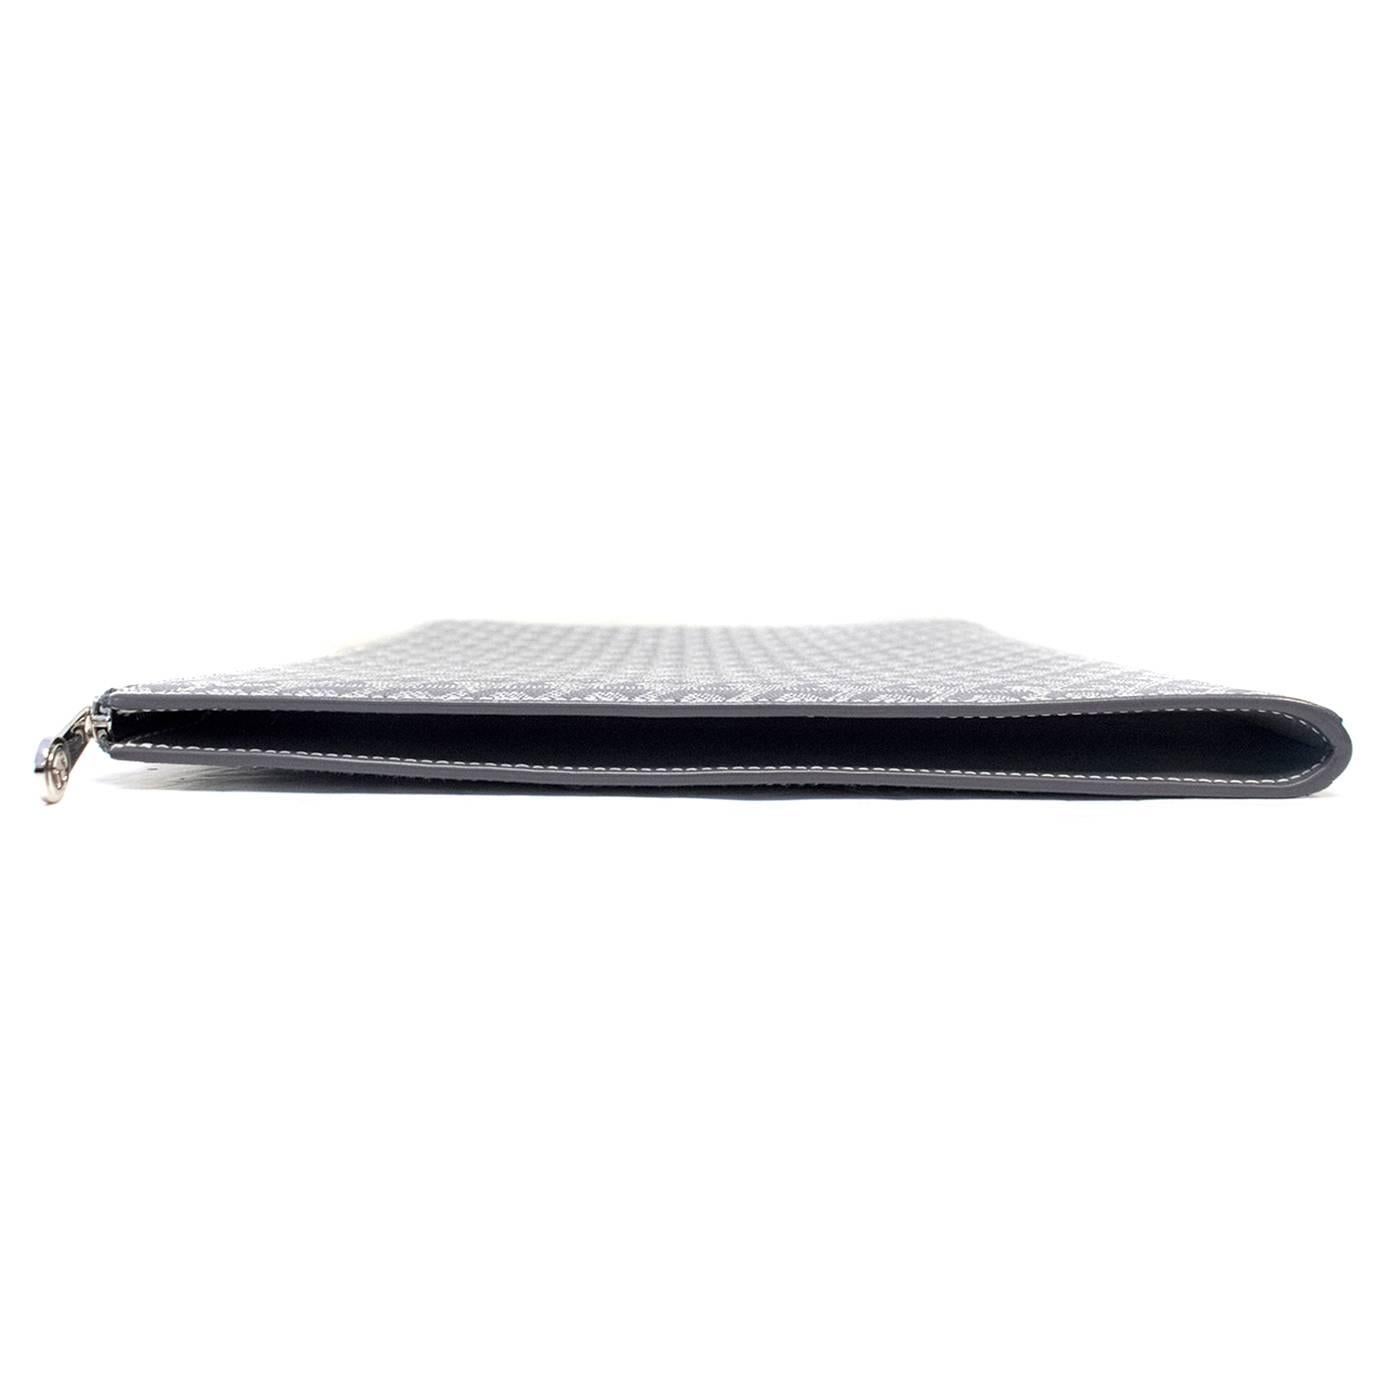 Goyard grey coated canvas laptop case with one main compartment and a document slip. Features a zipped outer pocket and yellow inner leather lining. 

Condition 10/10 

Measurements Approx:
Length -29cm
Width -39 cm
Depth -2cm 